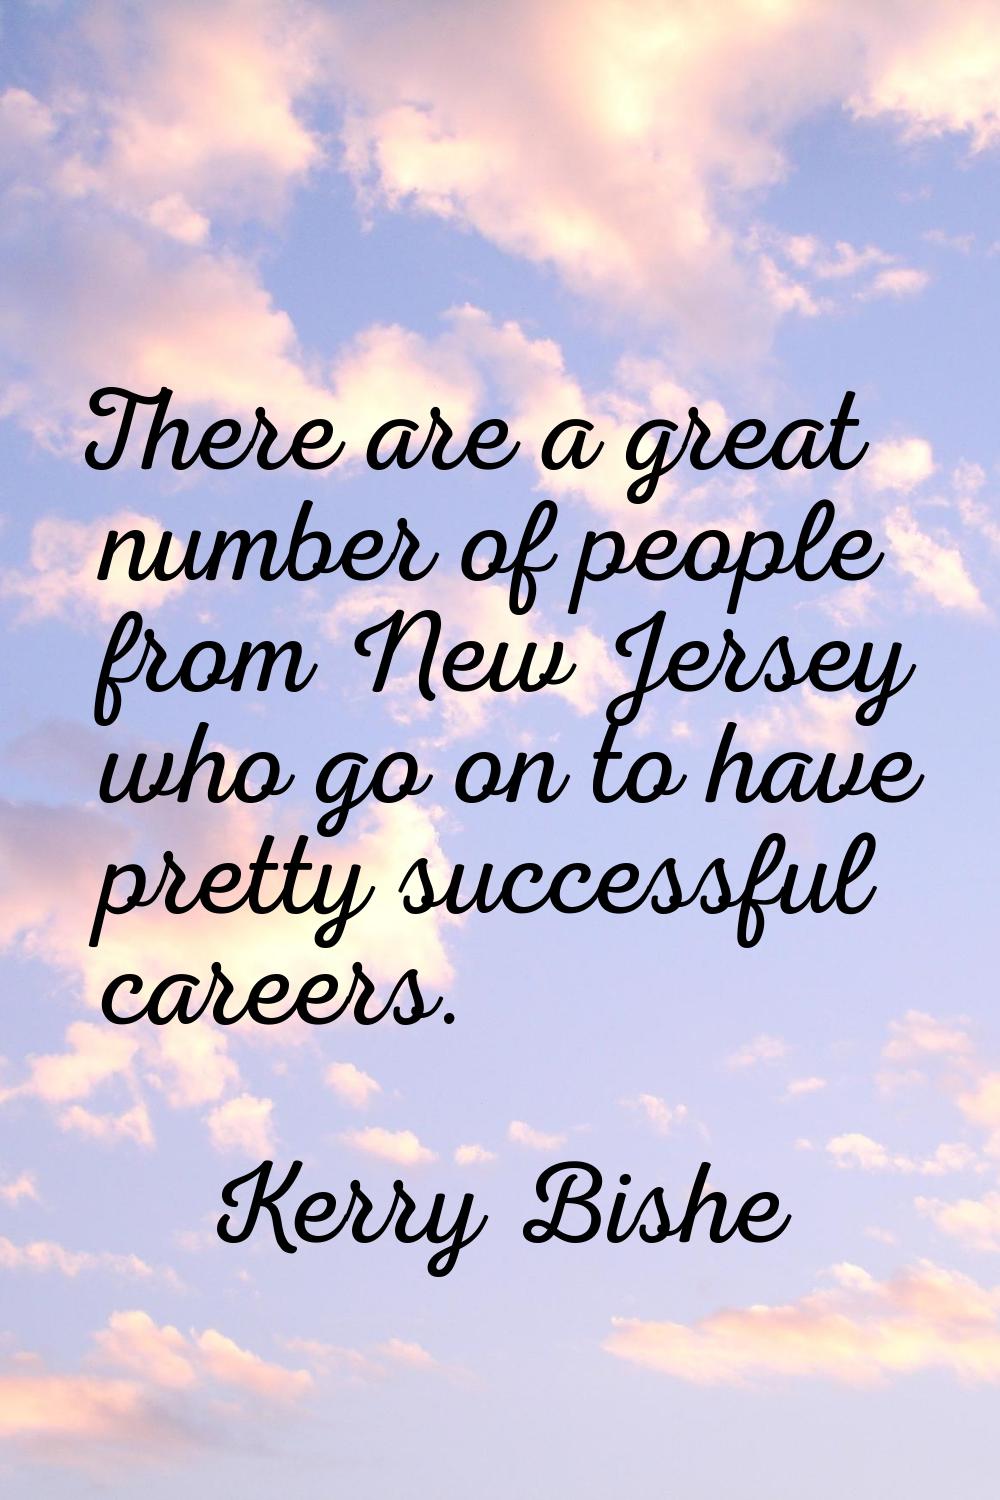 There are a great number of people from New Jersey who go on to have pretty successful careers.